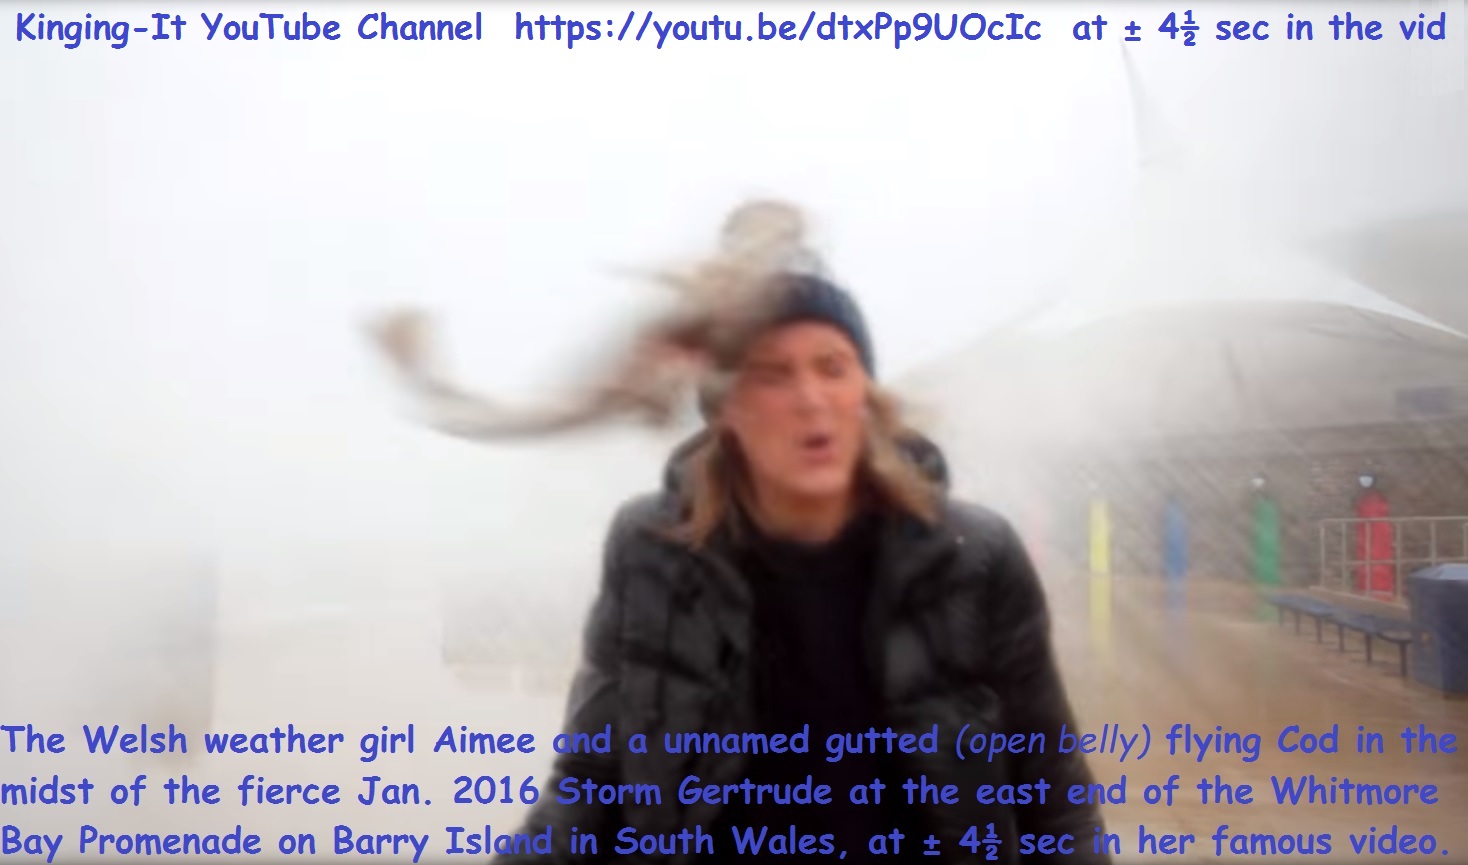 Weather girl Aimee slapped in face by gutted flying Cod 2016 Storm Gertrude Barry Island Wales 1.jpg